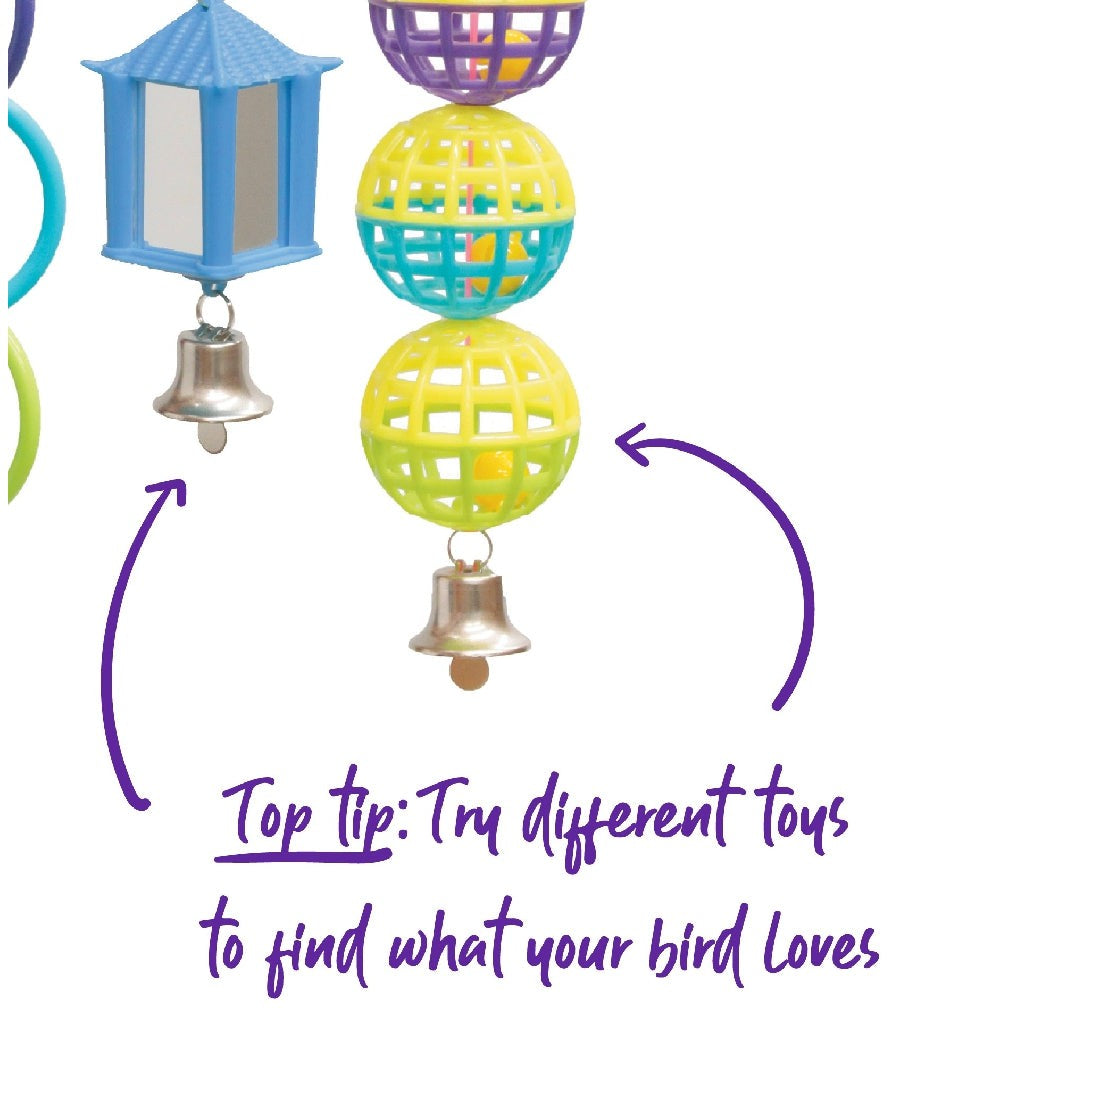 Colorful bird toys with bells and advice text on finding preferences.